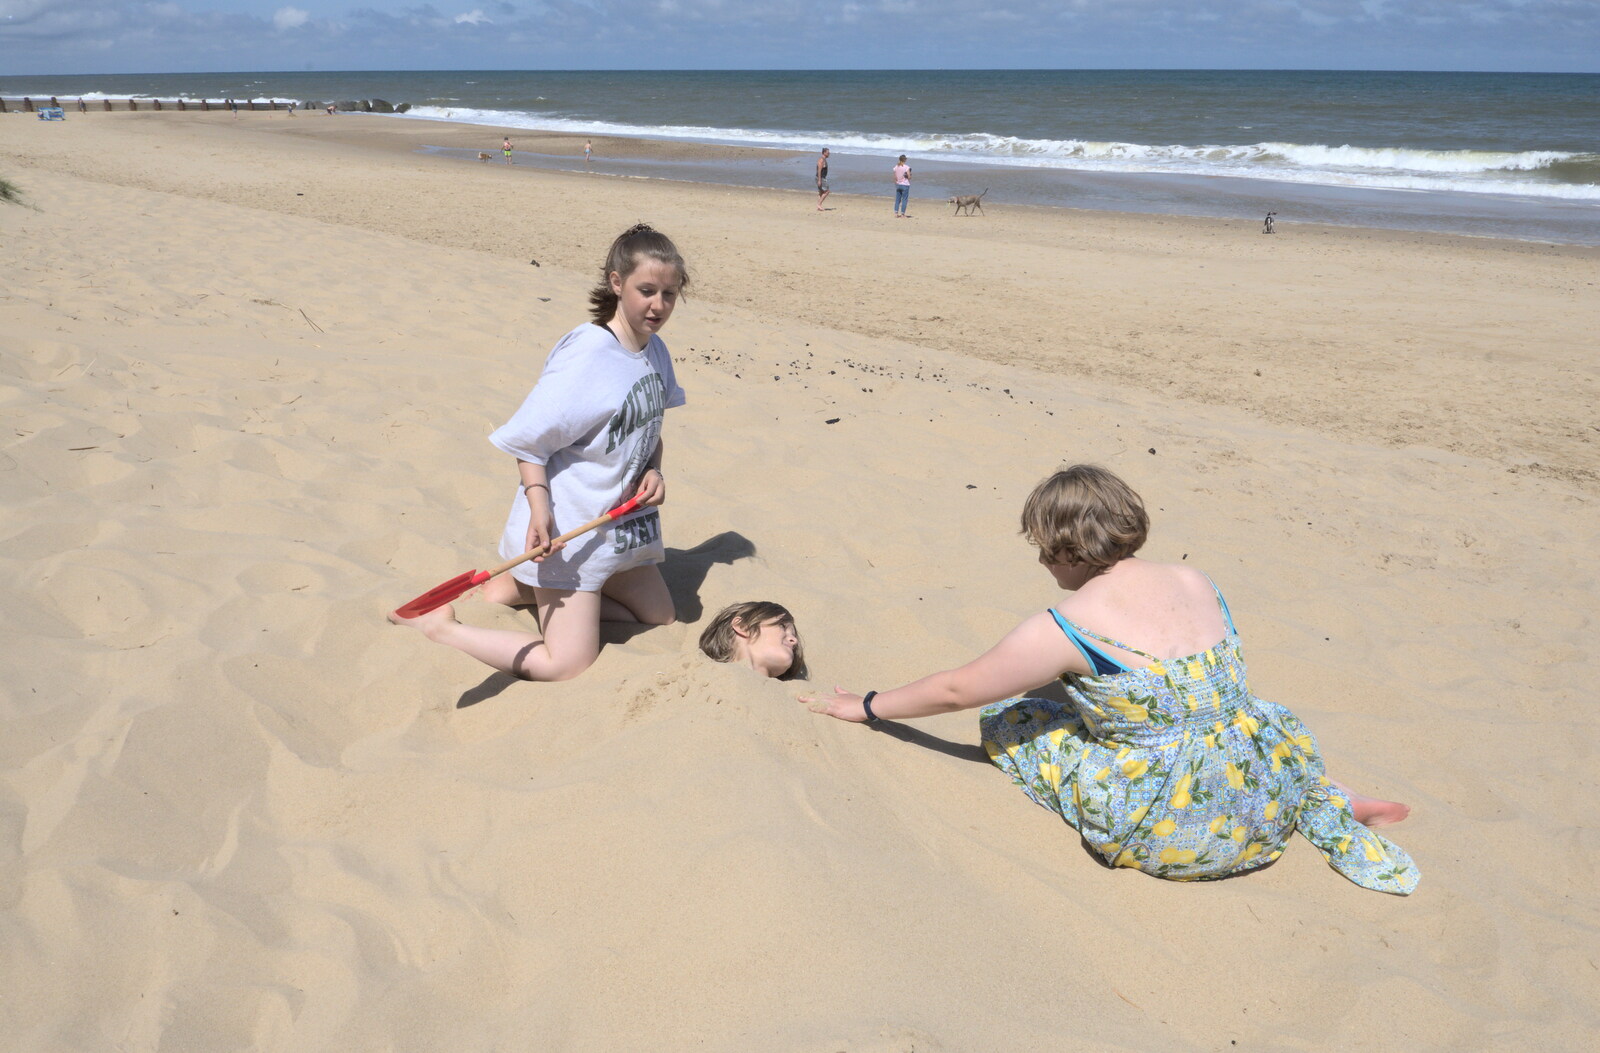 Harry gets buried in the sand from Camping in the Dunes, Waxham Sands, Norfolk - 9th July 2022